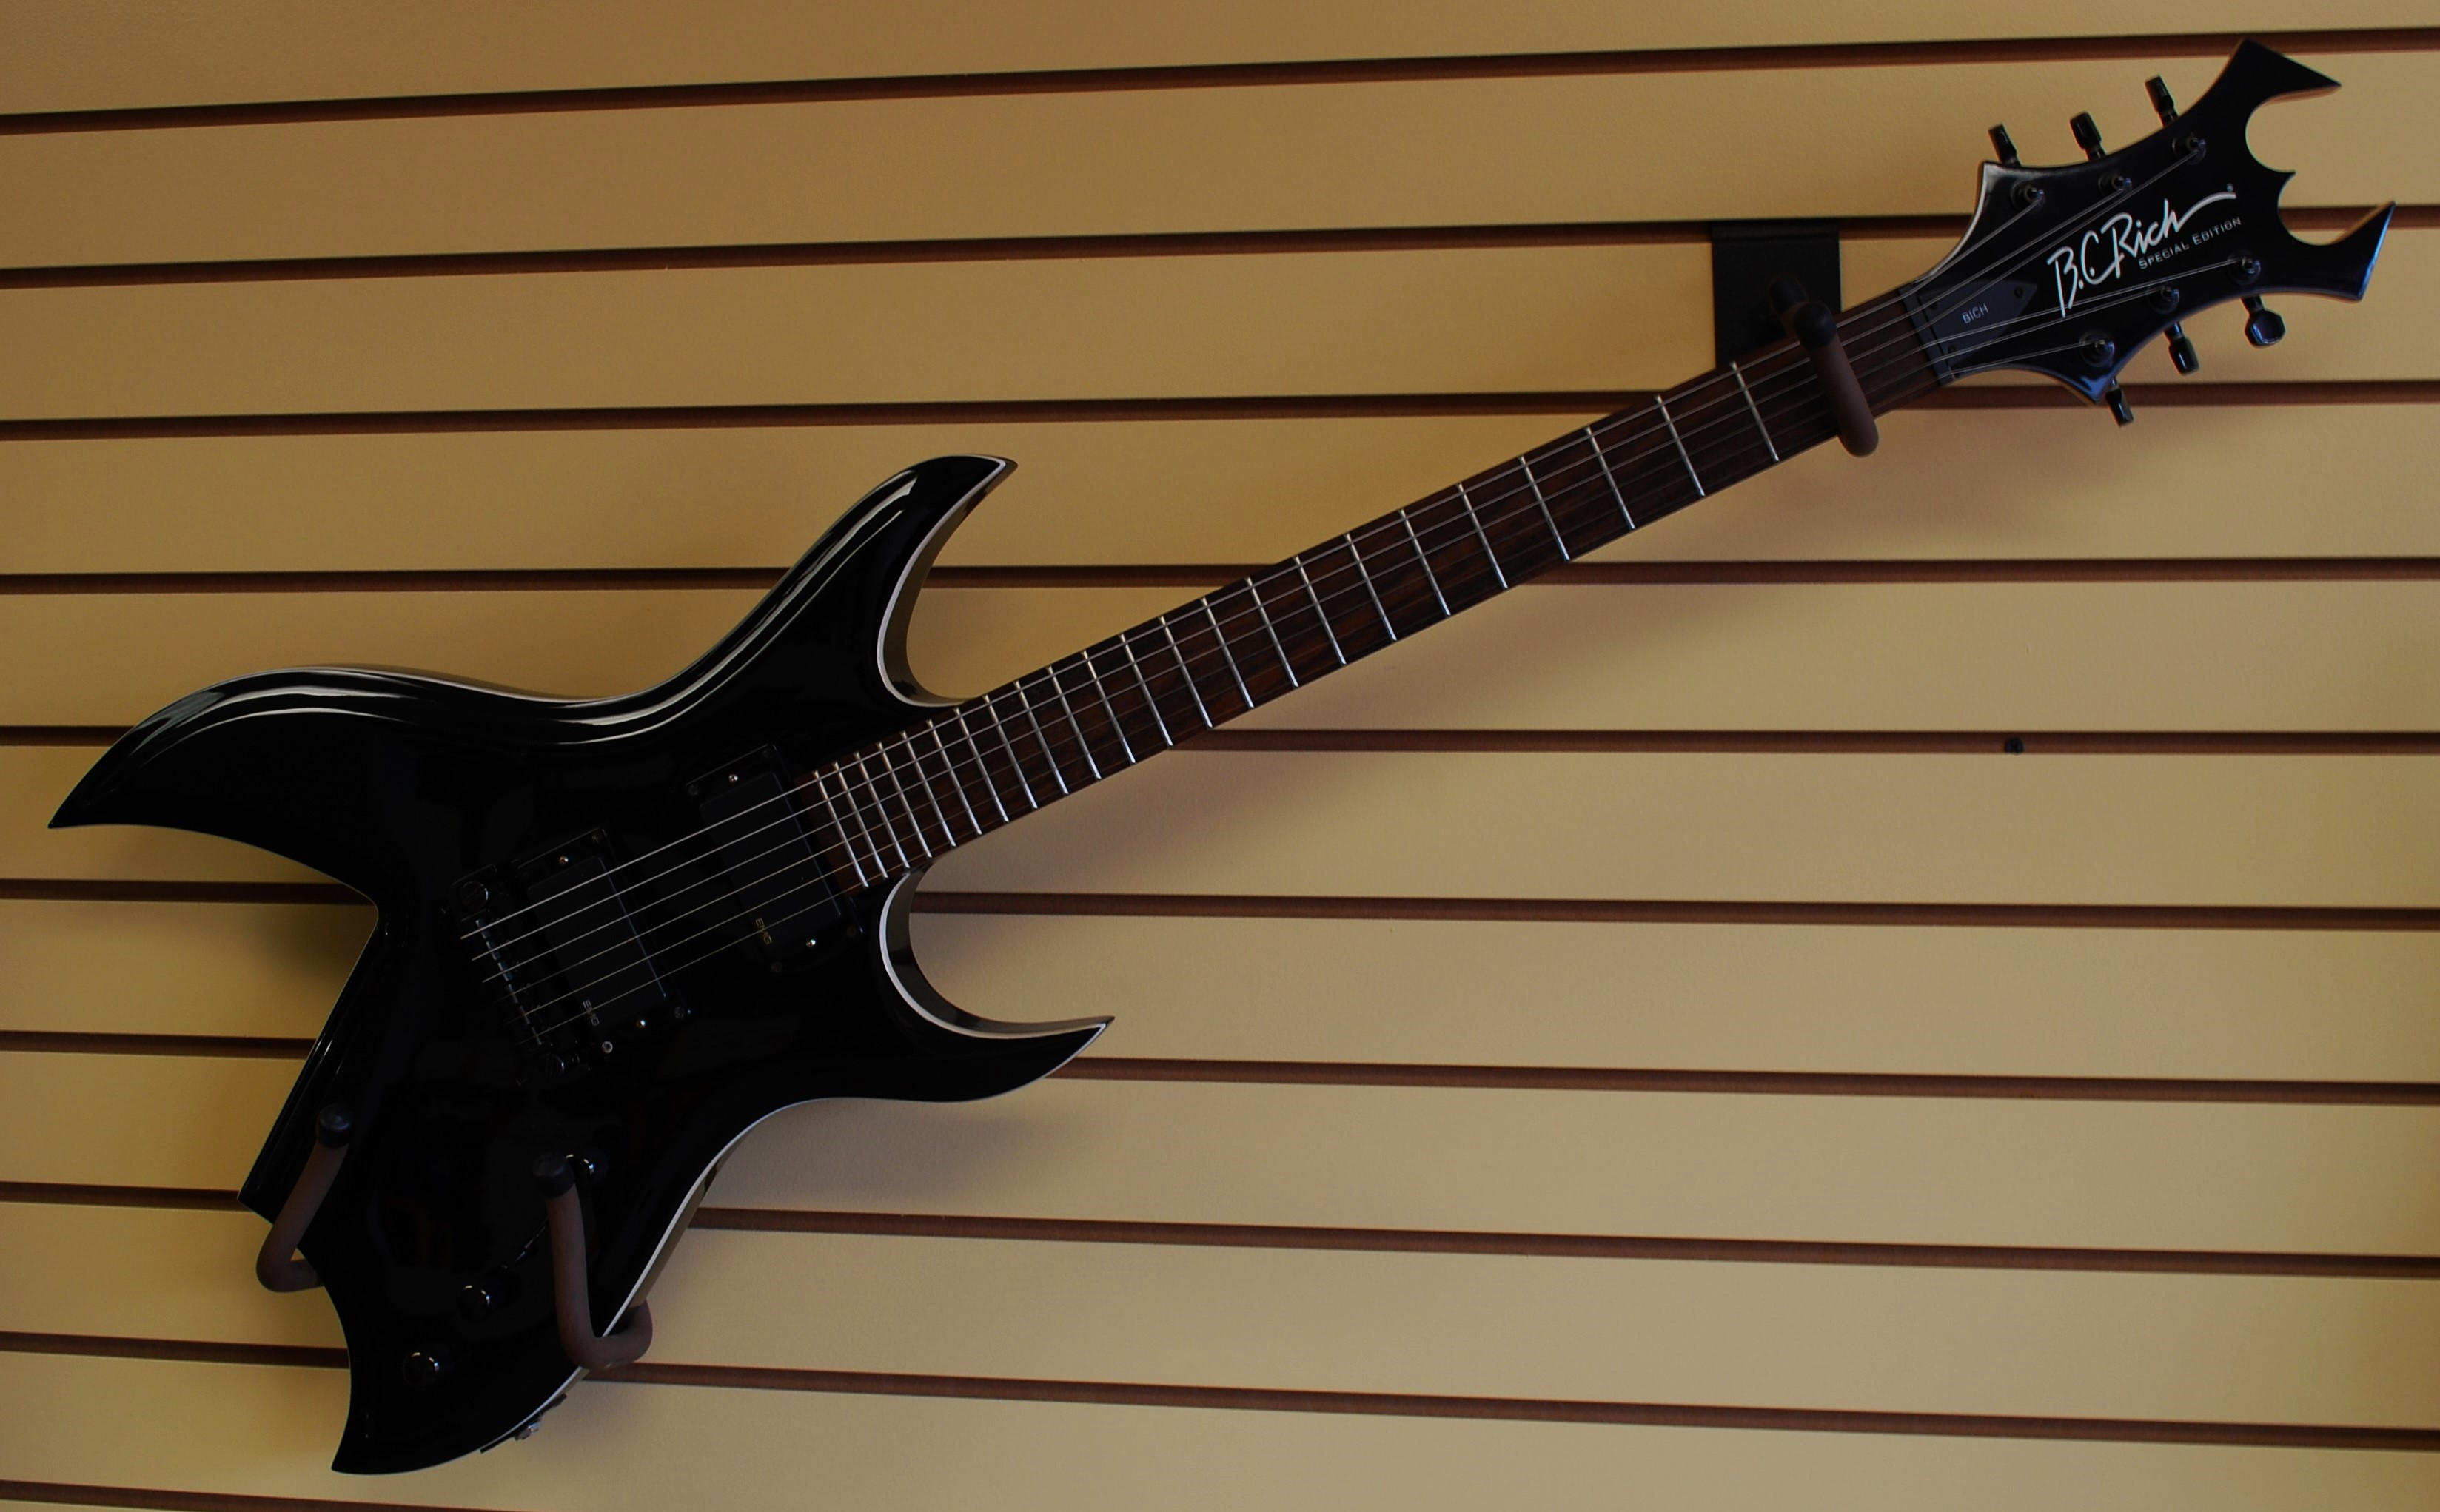 BC Rich Guitars started back in the late 70's as an advancement of the...